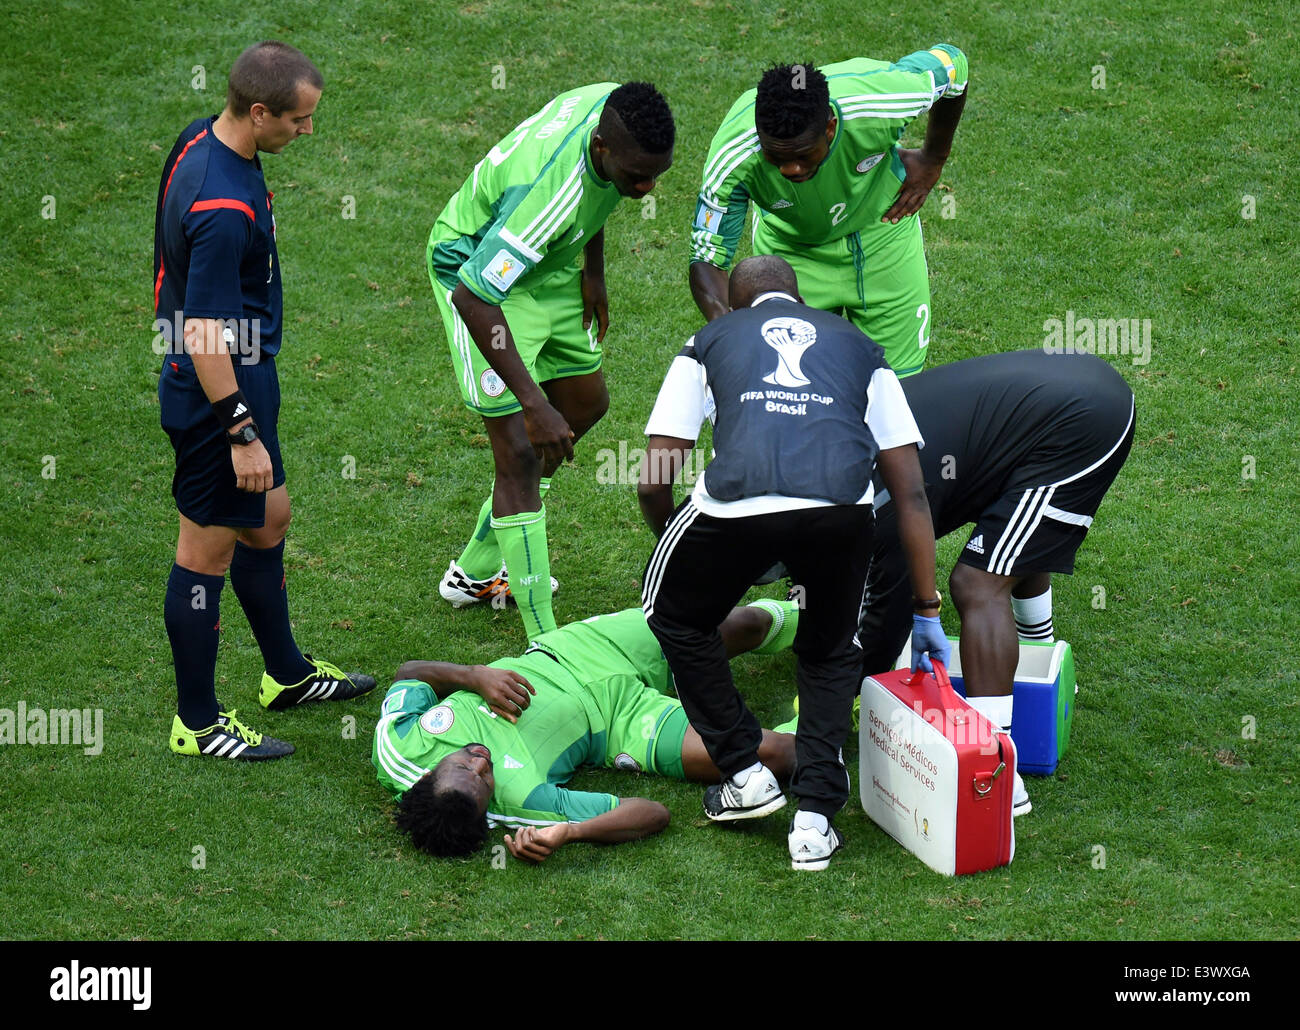 Brasilia, Brazil. 30th June, 2014. Nigeria's Efe Ambrose receives medical treatment during a Round of 16 match between France and Nigeria of 2014 FIFA World Cup at the Estadio Nacional Stadium in Brasilia, Brazil, on June 30, 2014. France won 2-0 over Nigeria and qualified for Quarter-finals here on Monday. Credit:  Liu Dawei/Xinhua/Alamy Live News Stock Photo